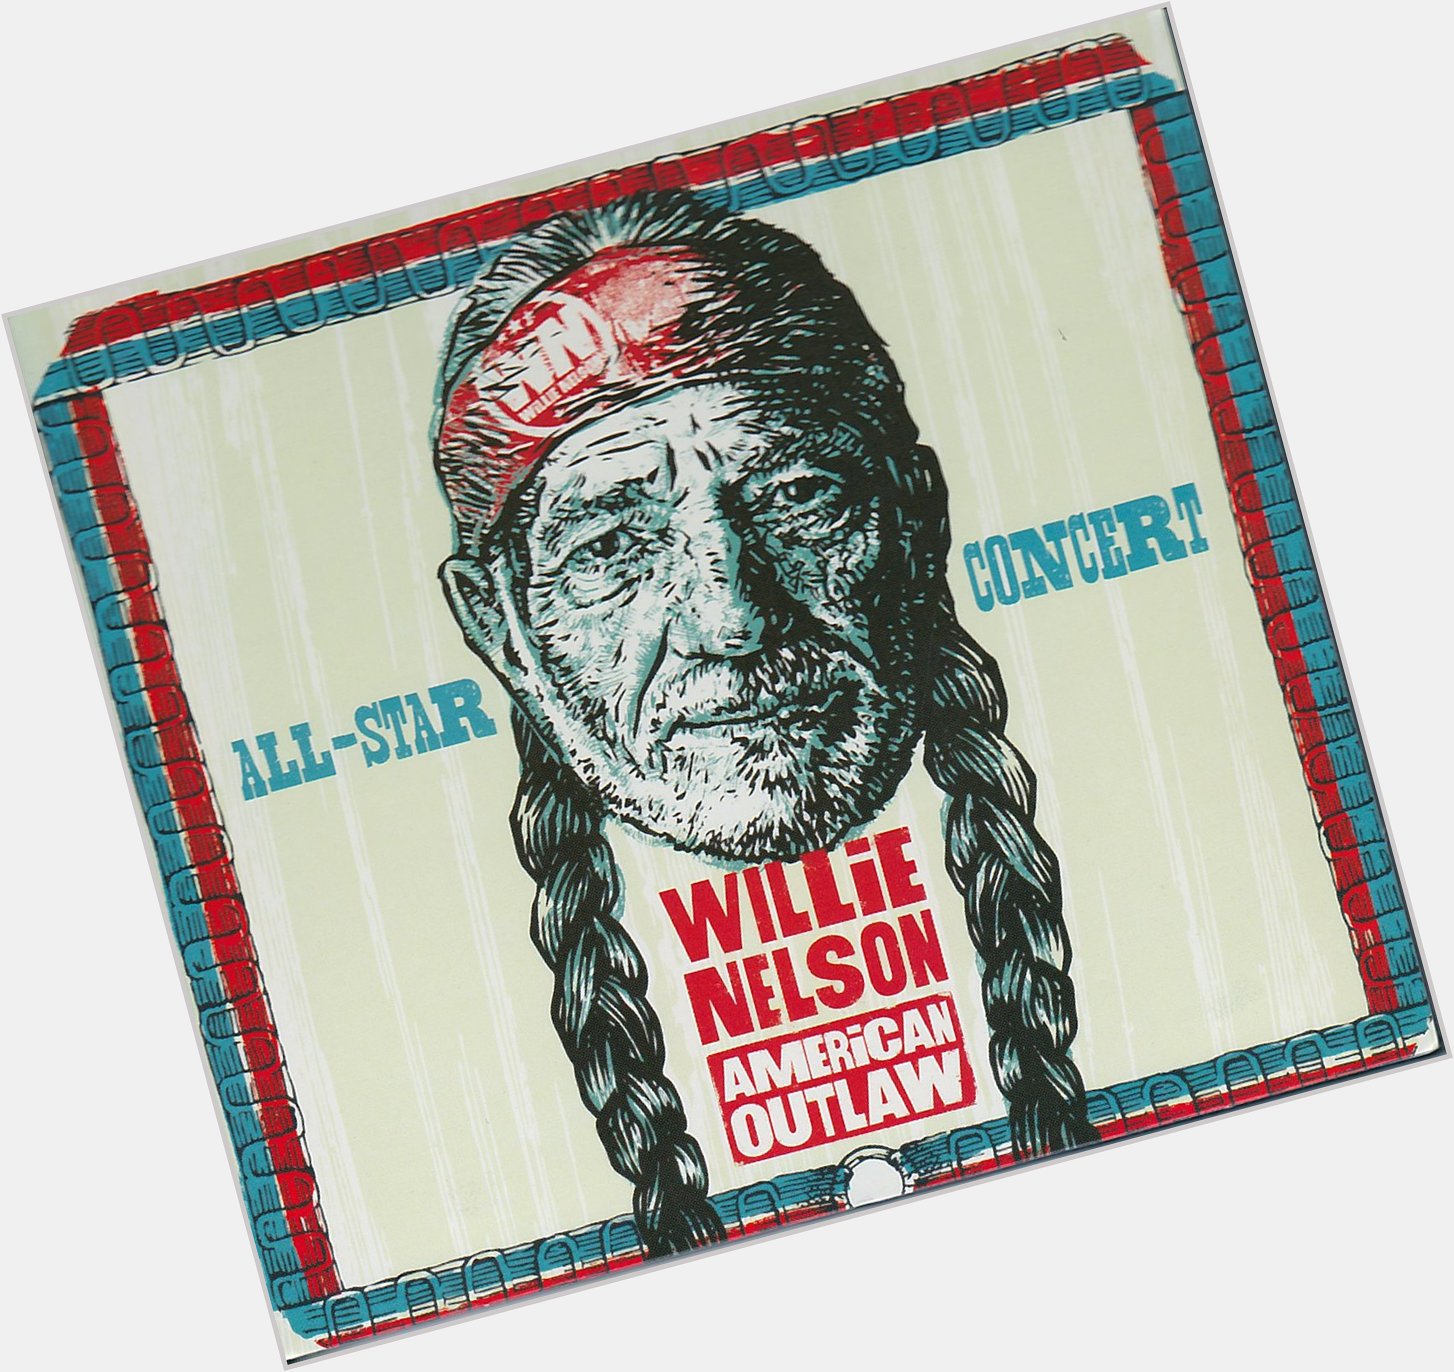 Happy Birthday Willie Nelson!
A real Texan. 
A real country icon.
88 years old and still singing.... 